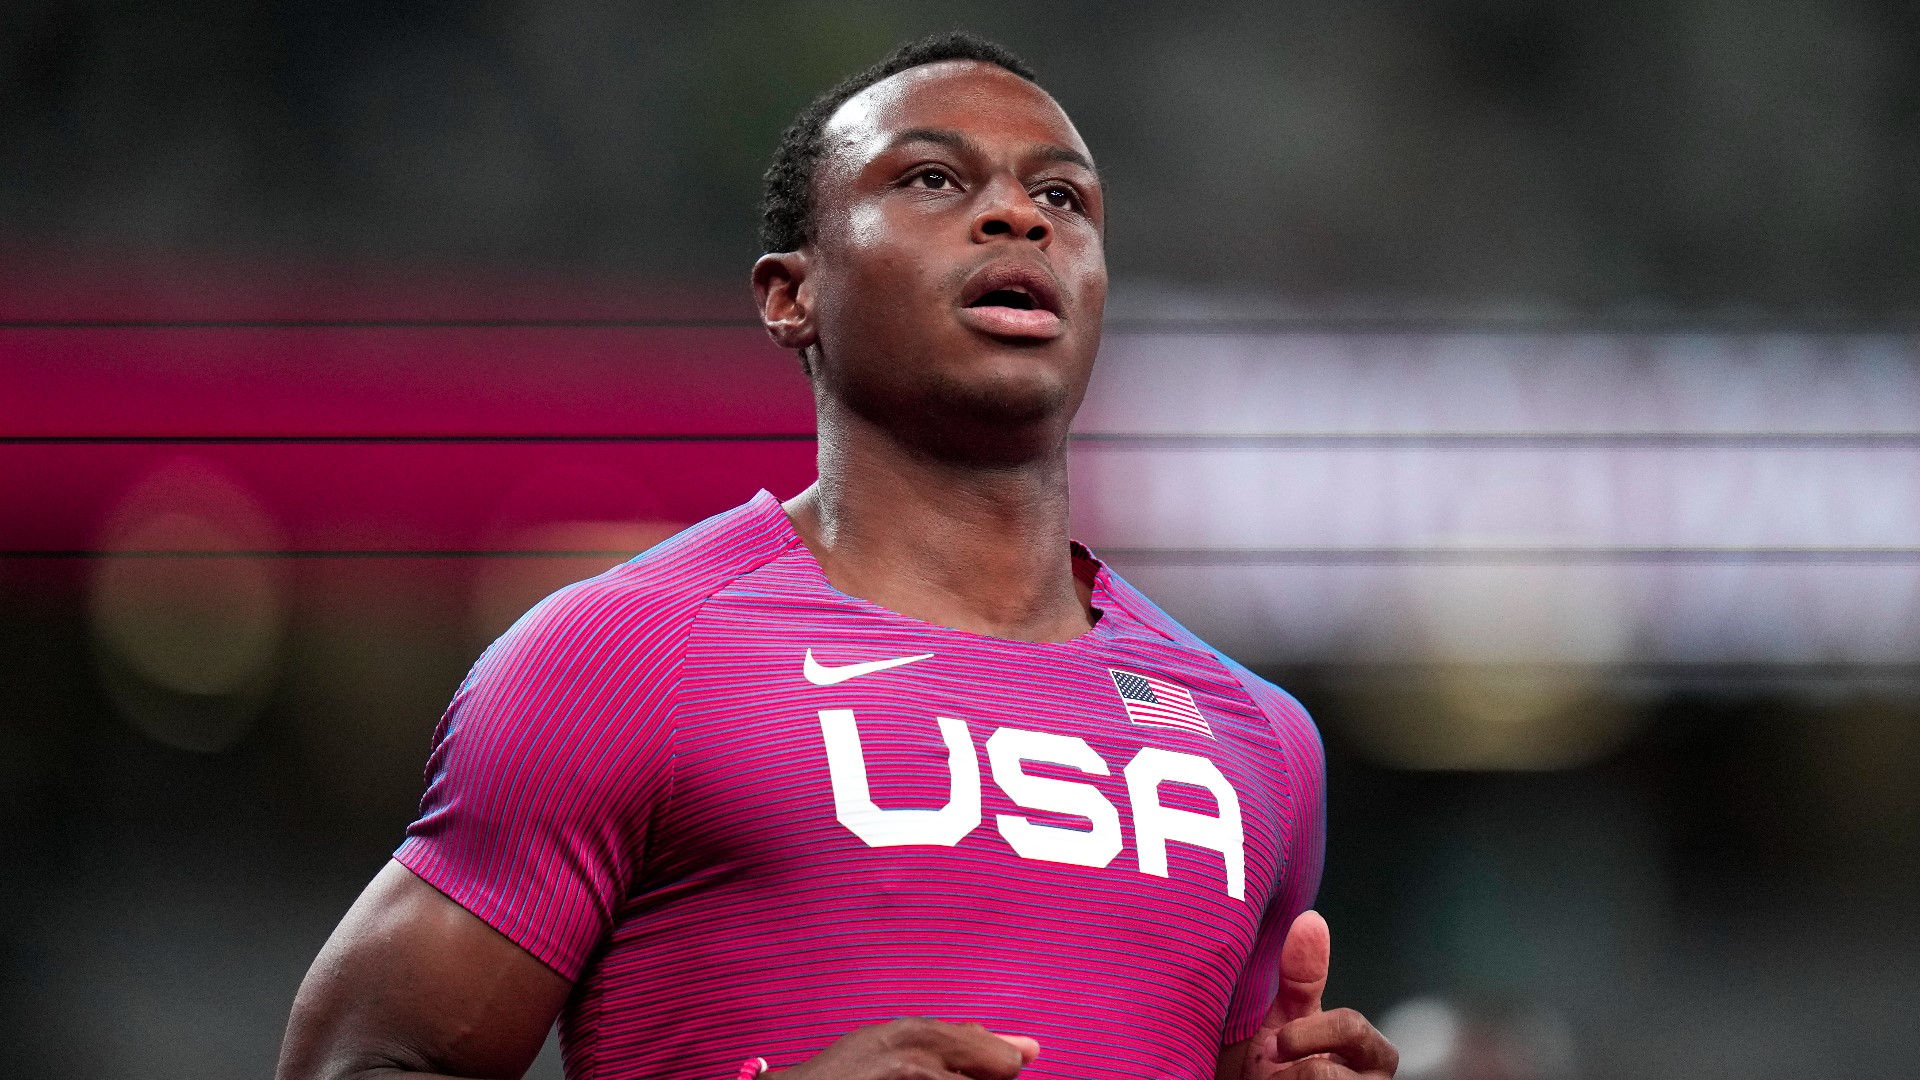 Louisville native Ronnie Baker still has a second chance at gold in the 4x100 relay.